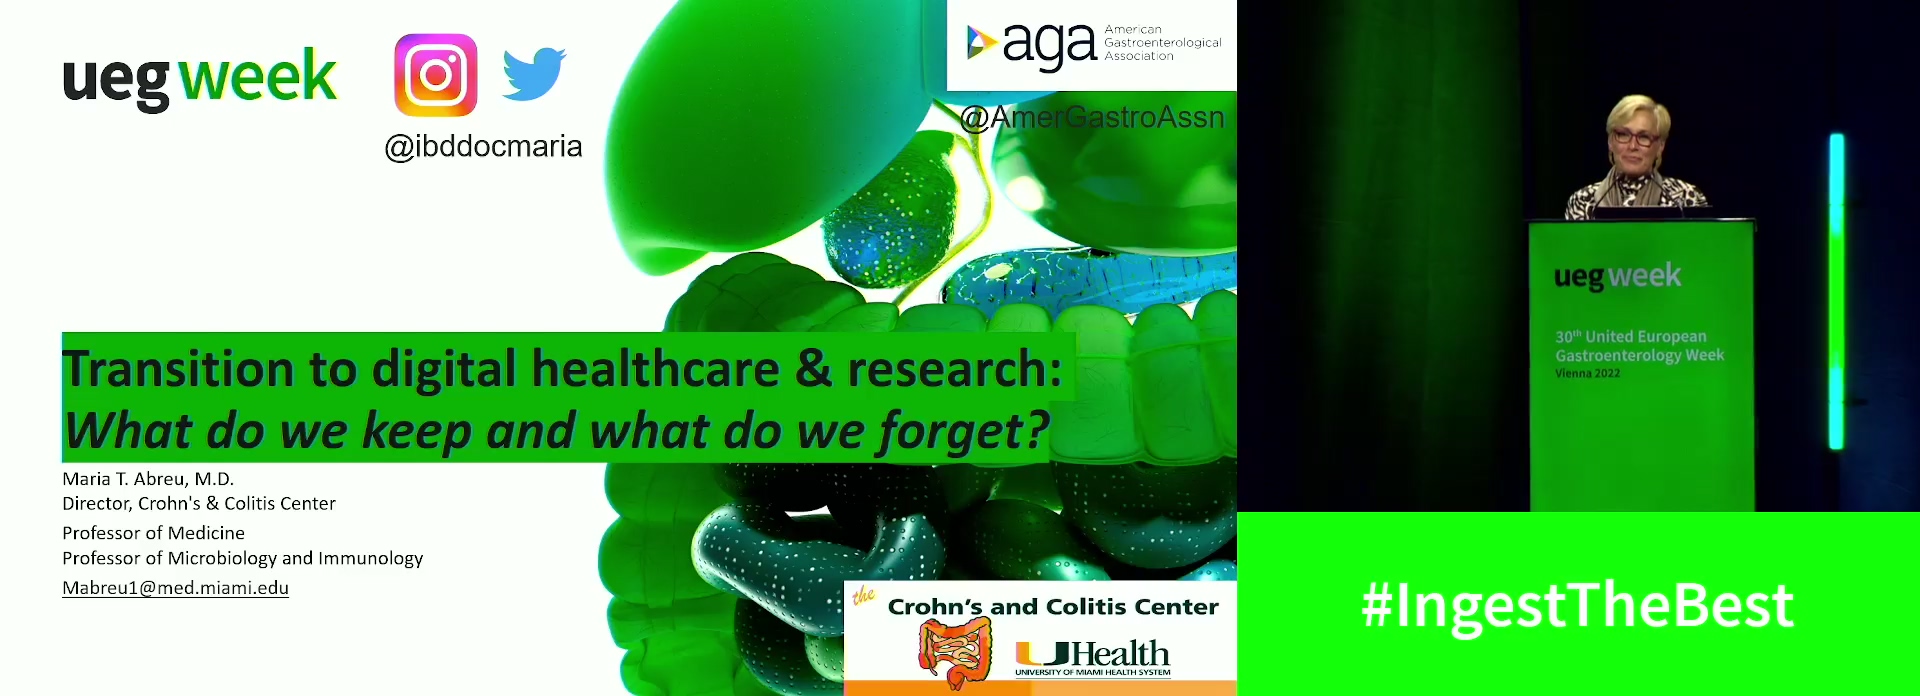 Transition to digital healthcare & research: What do we keep and what do we forget?